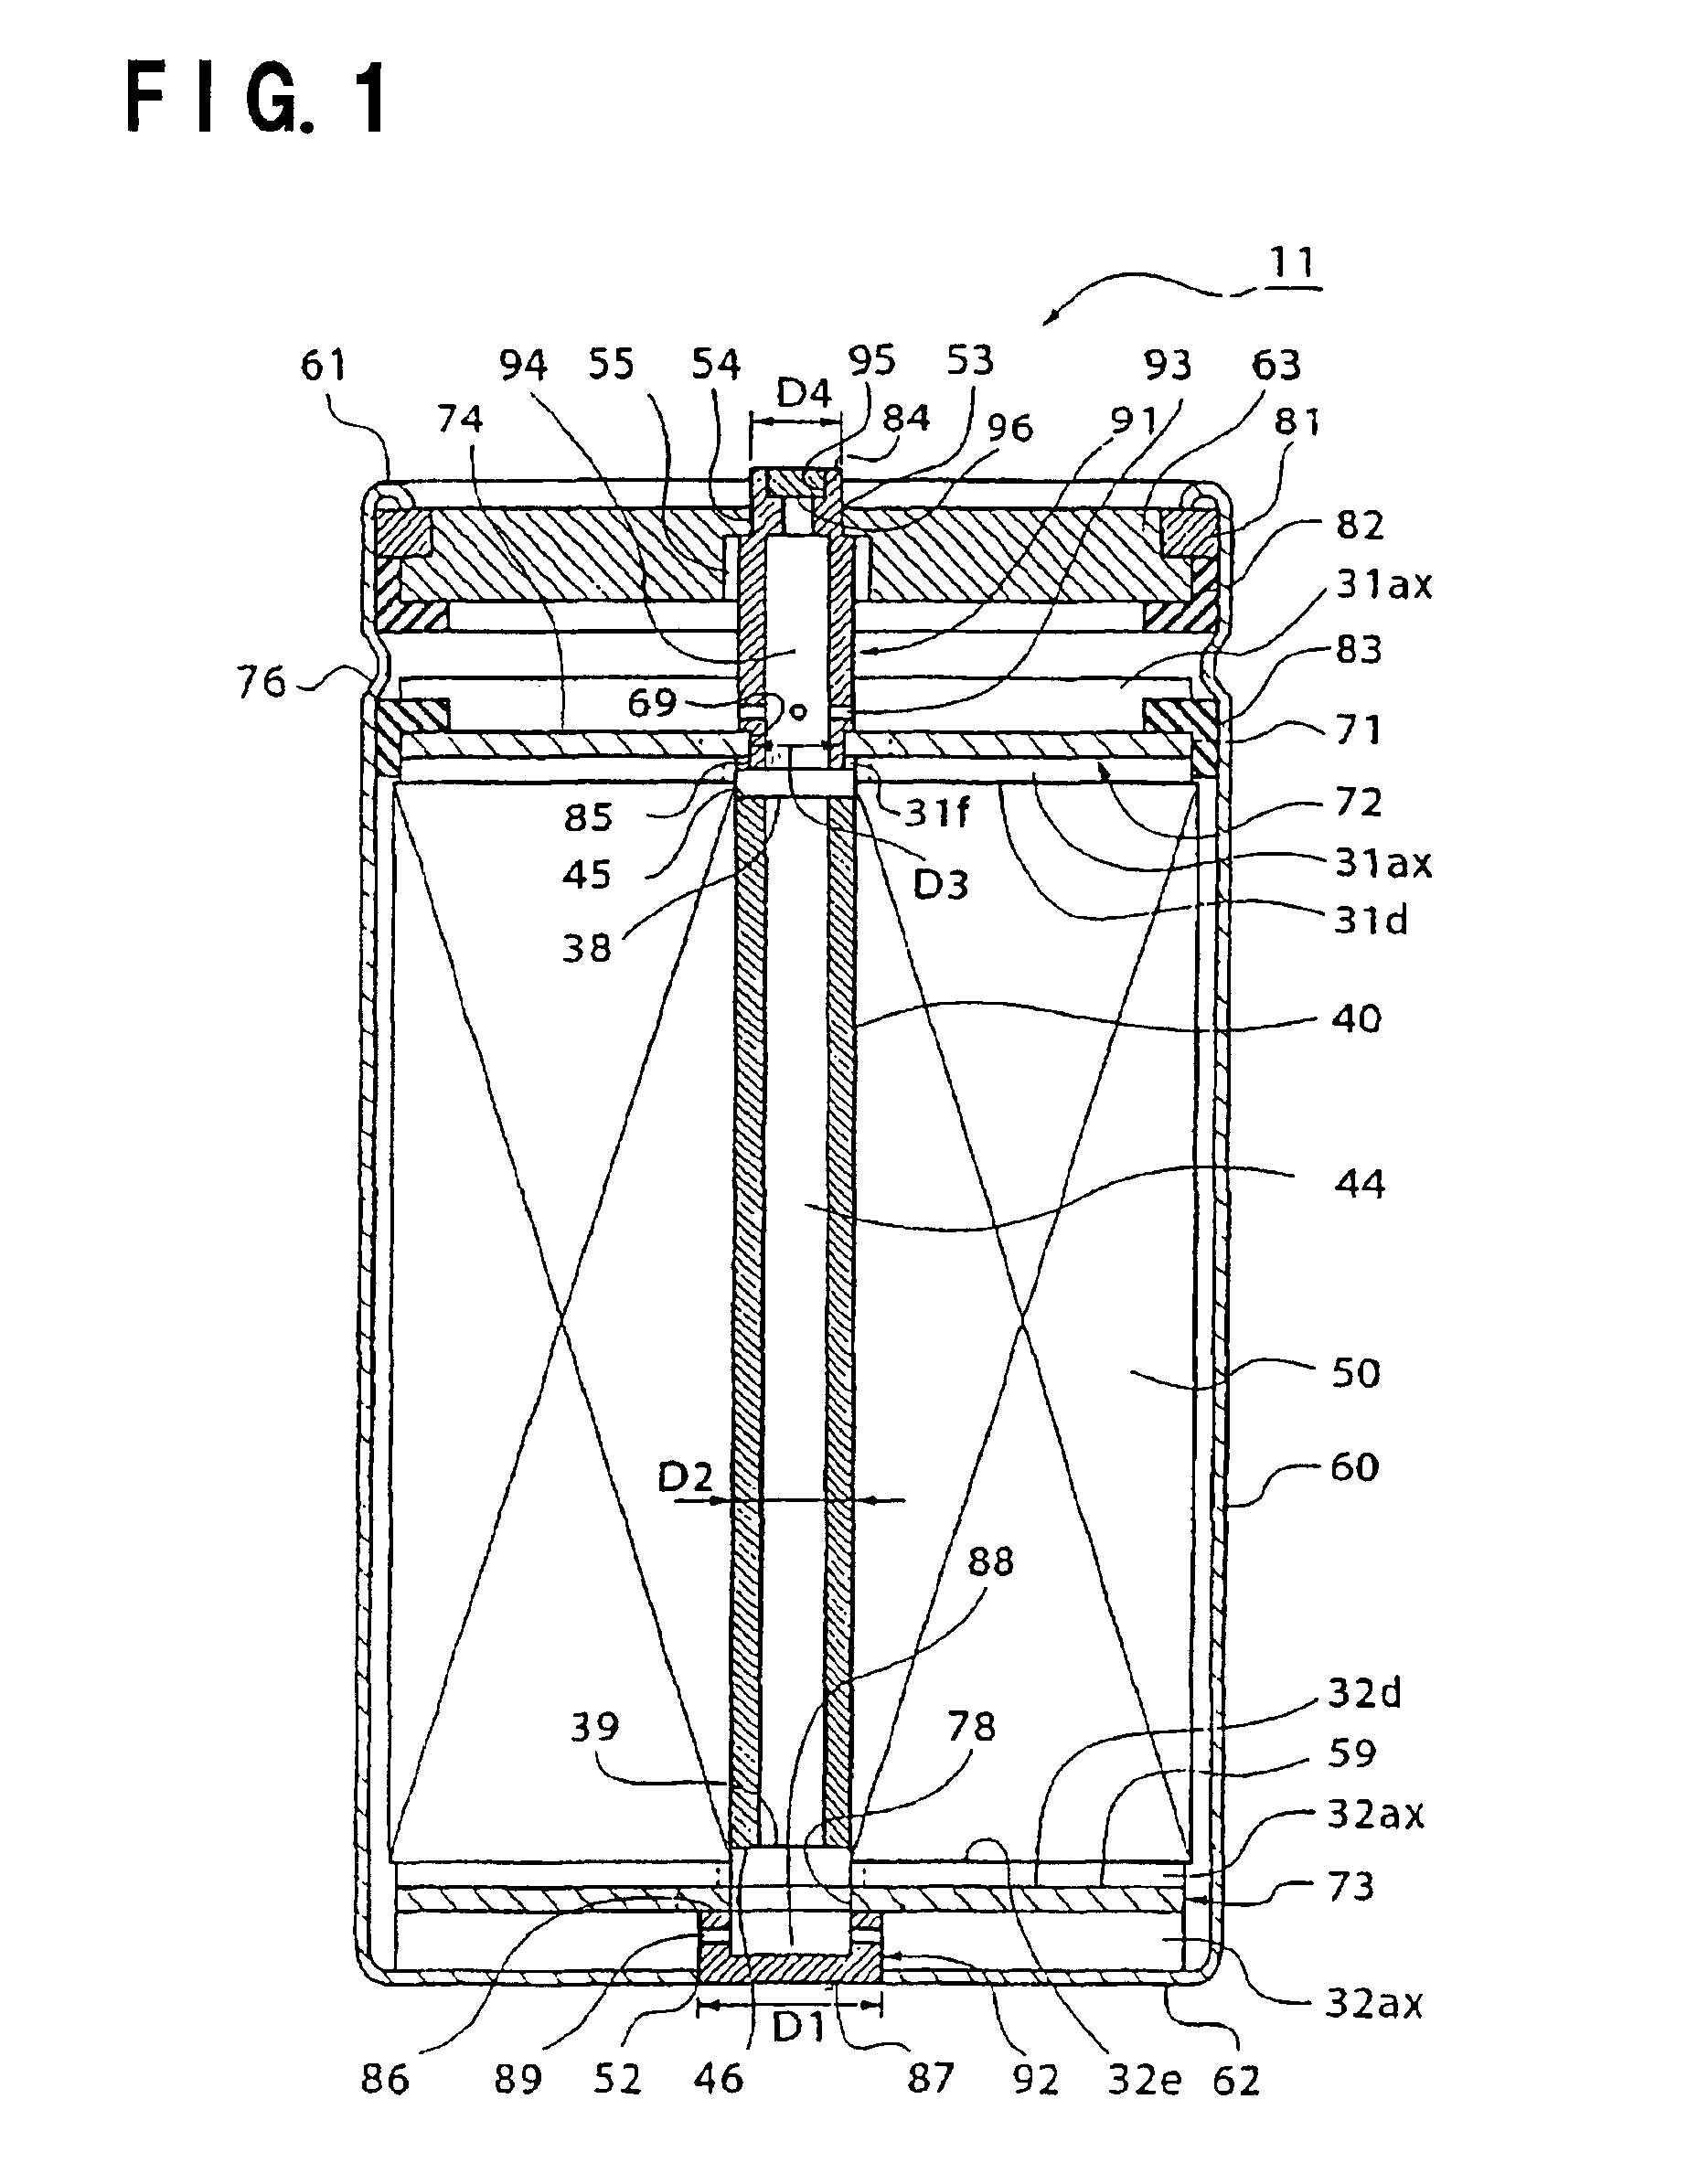 Electrochemical device comprising a pair of electrodes and an electrolyte